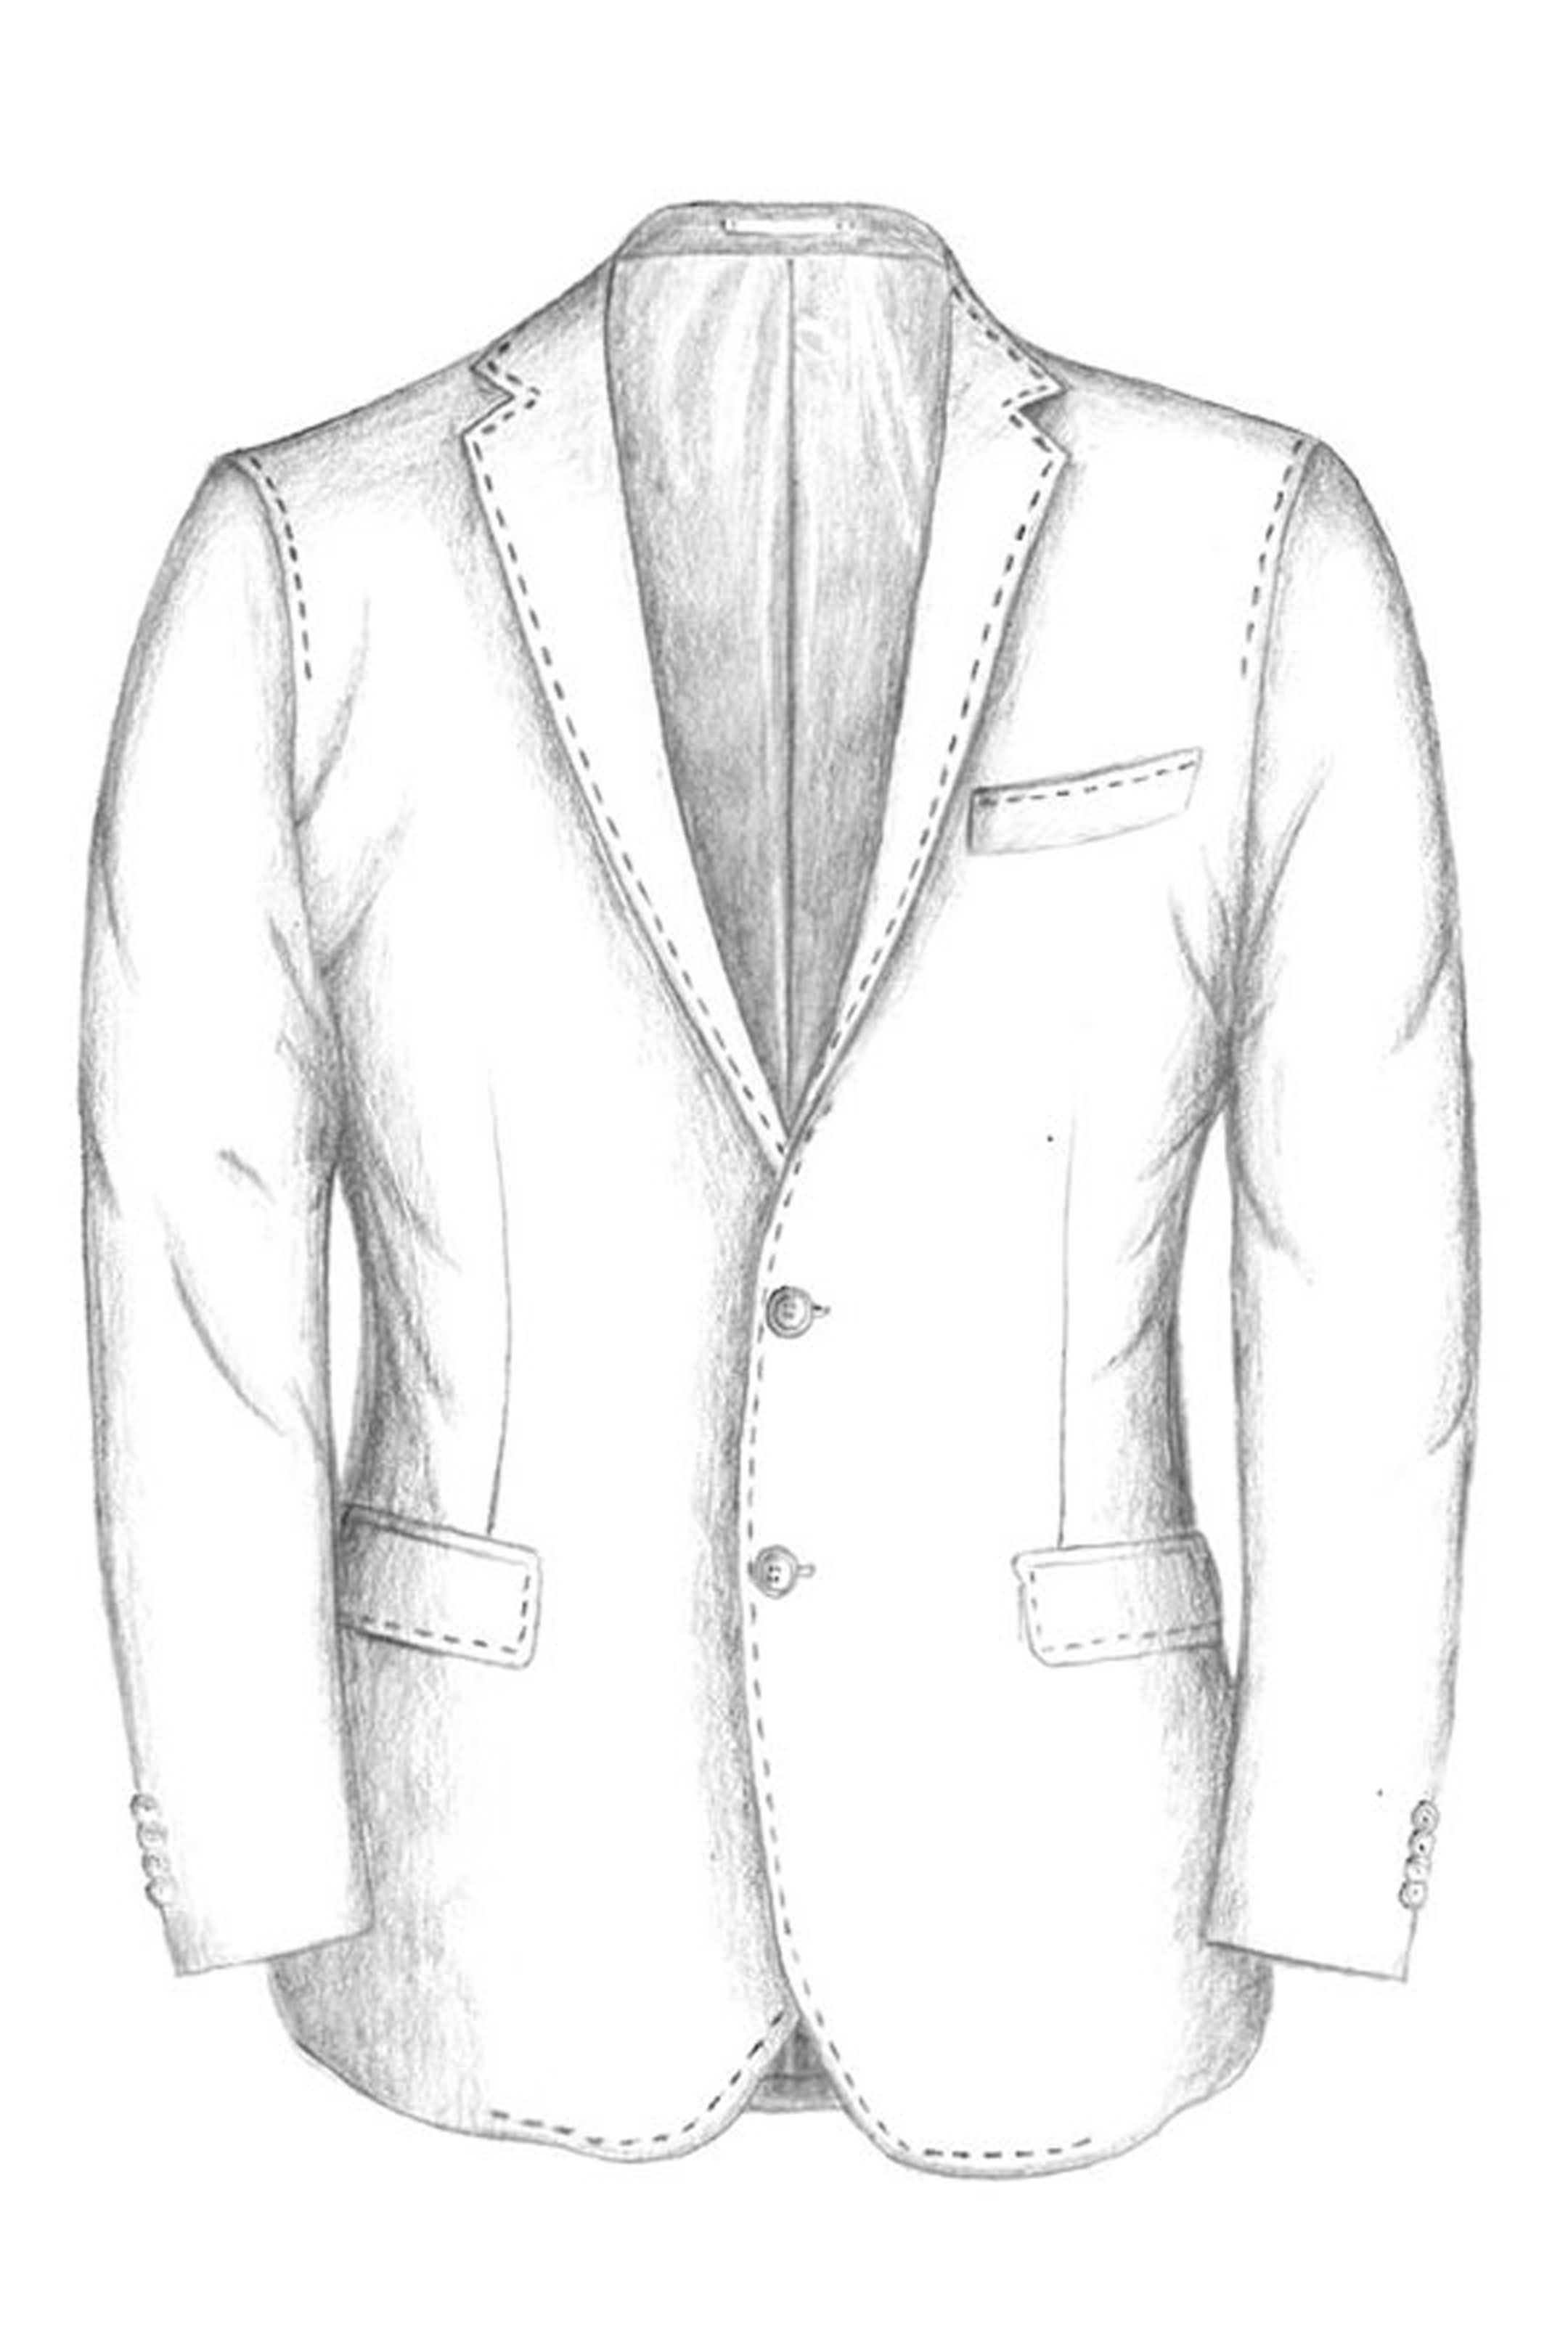 Tuxedo Sketch at PaintingValley.com | Explore collection of Tuxedo Sketch